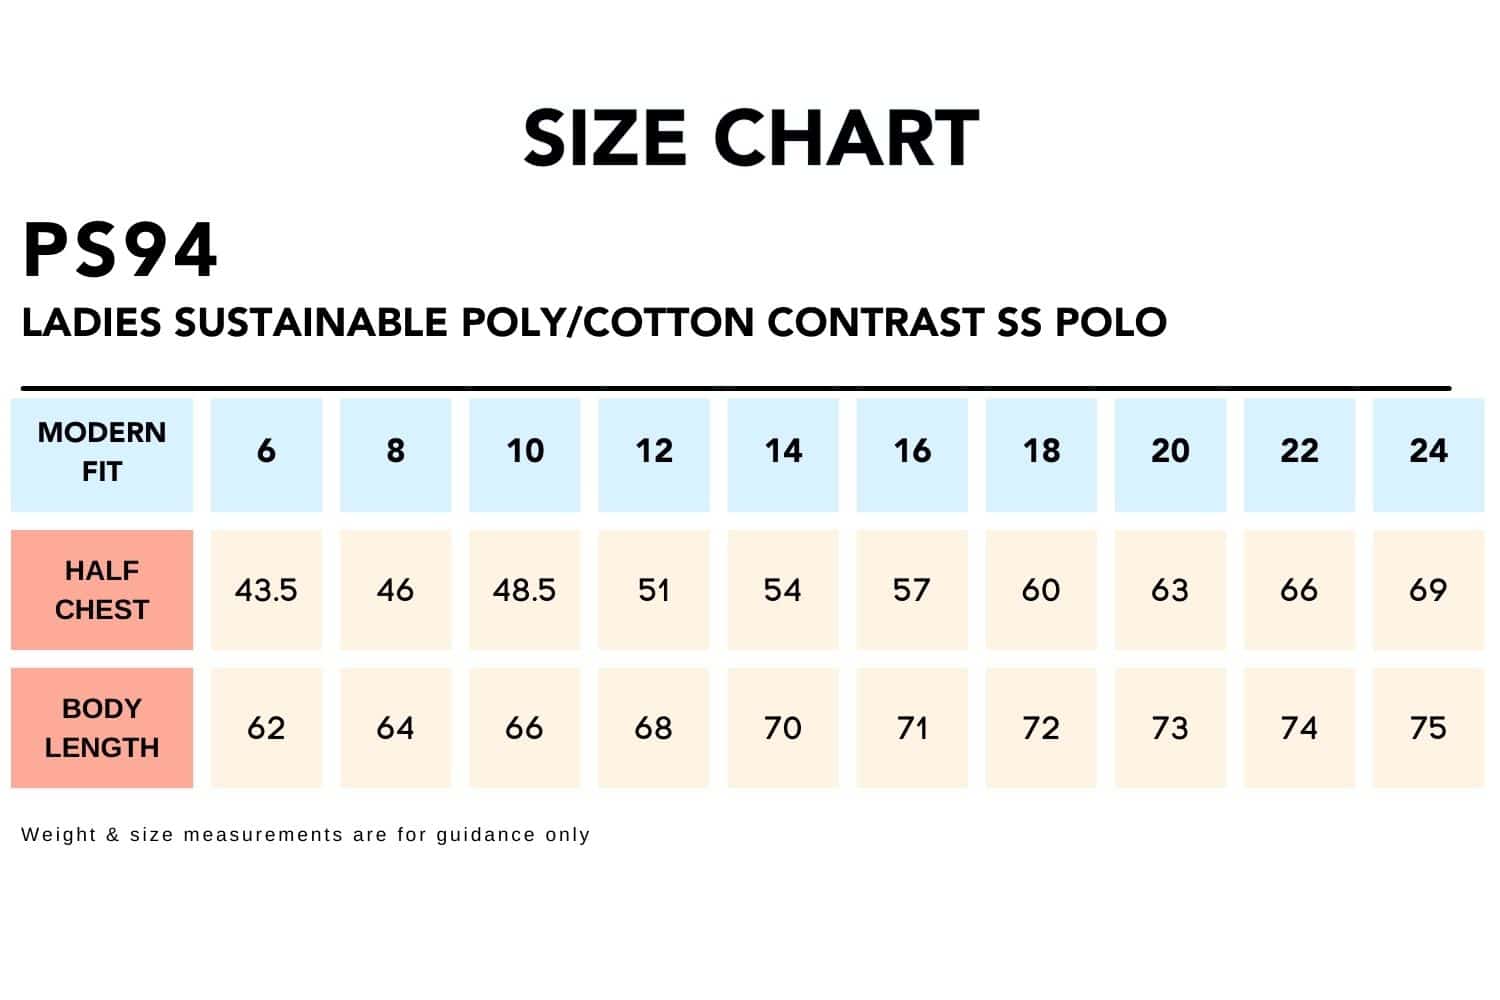 Size-Chart_PS94-LADIES-SUSTAINABLE-POLYCOTTON-CONTRAST-SS-POLO